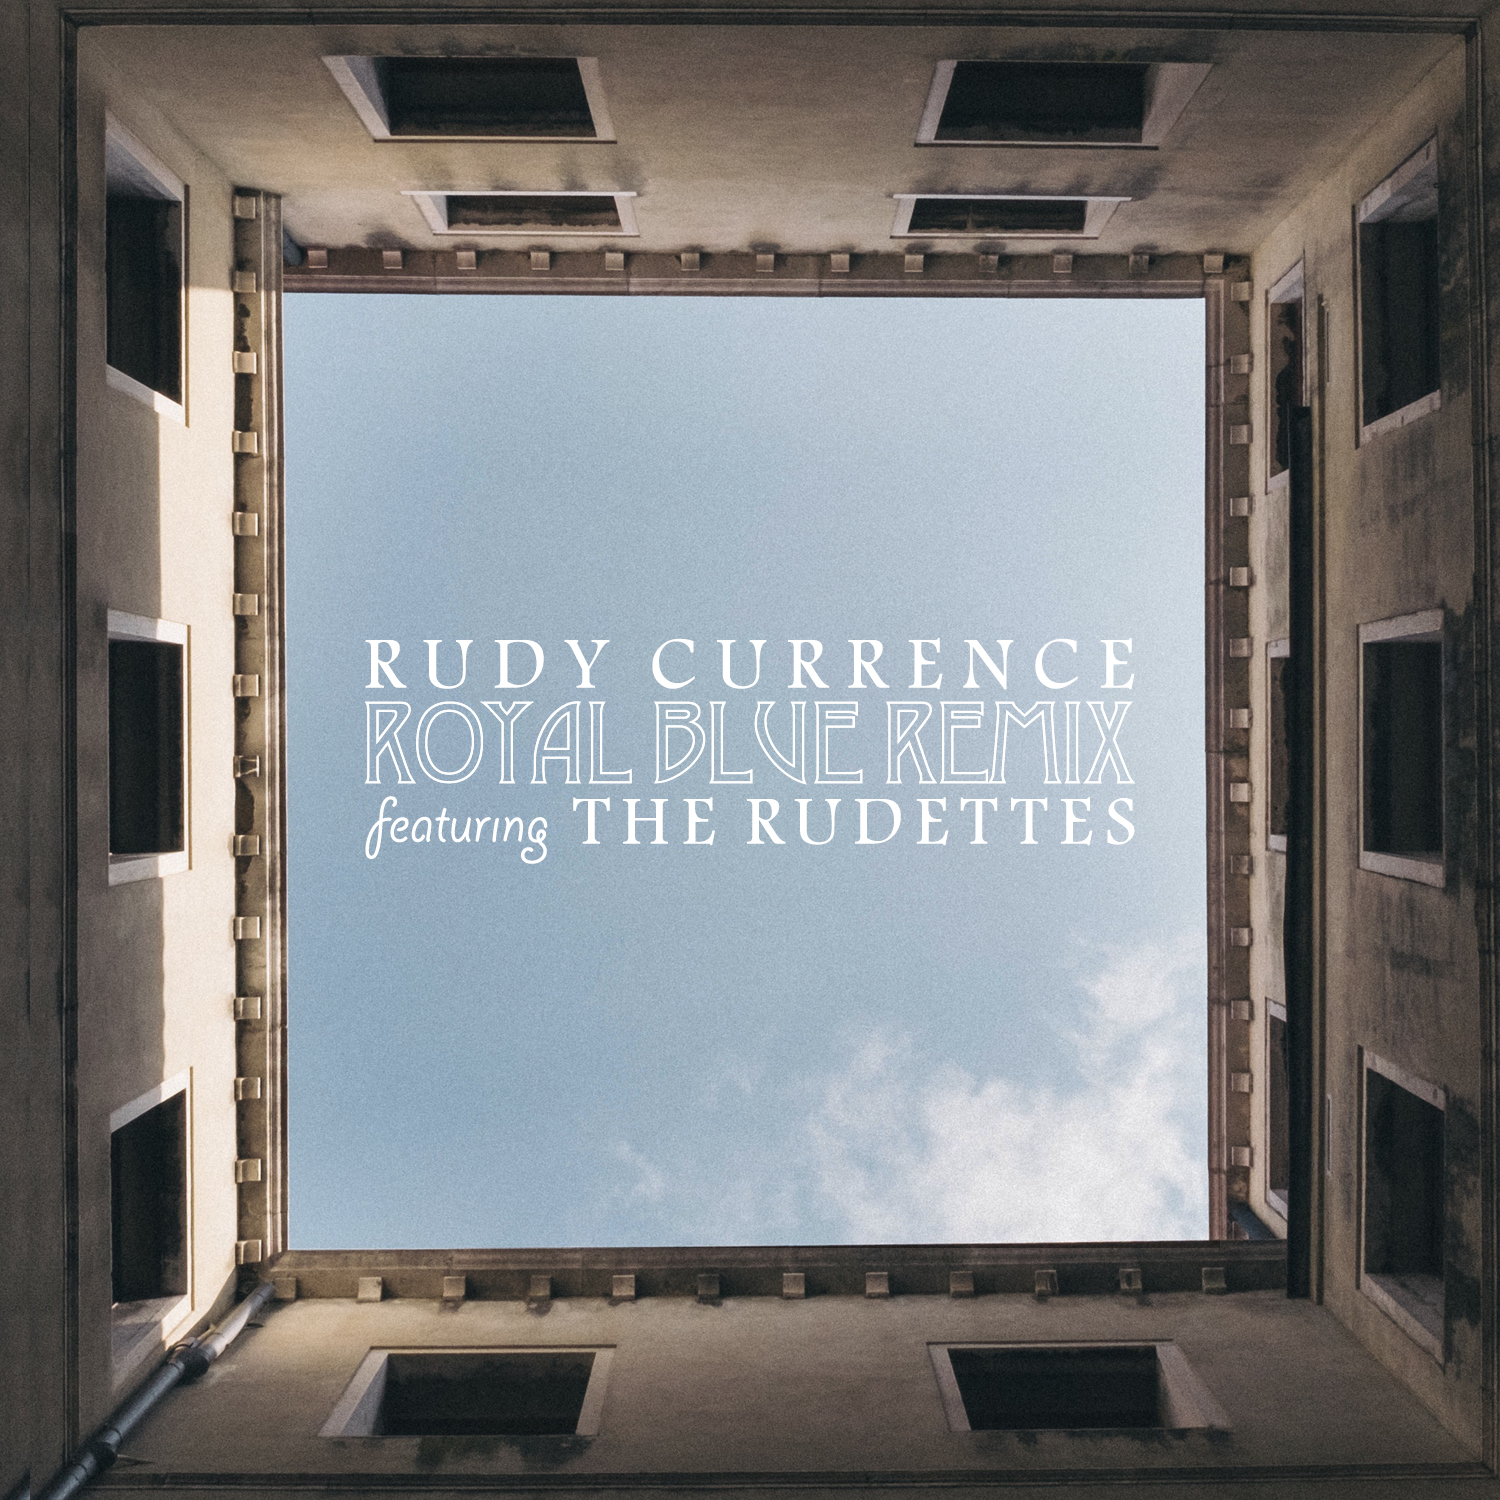 New Music: Rudy Currence – Royal Blue (Remix) (featuring The Rudettes)